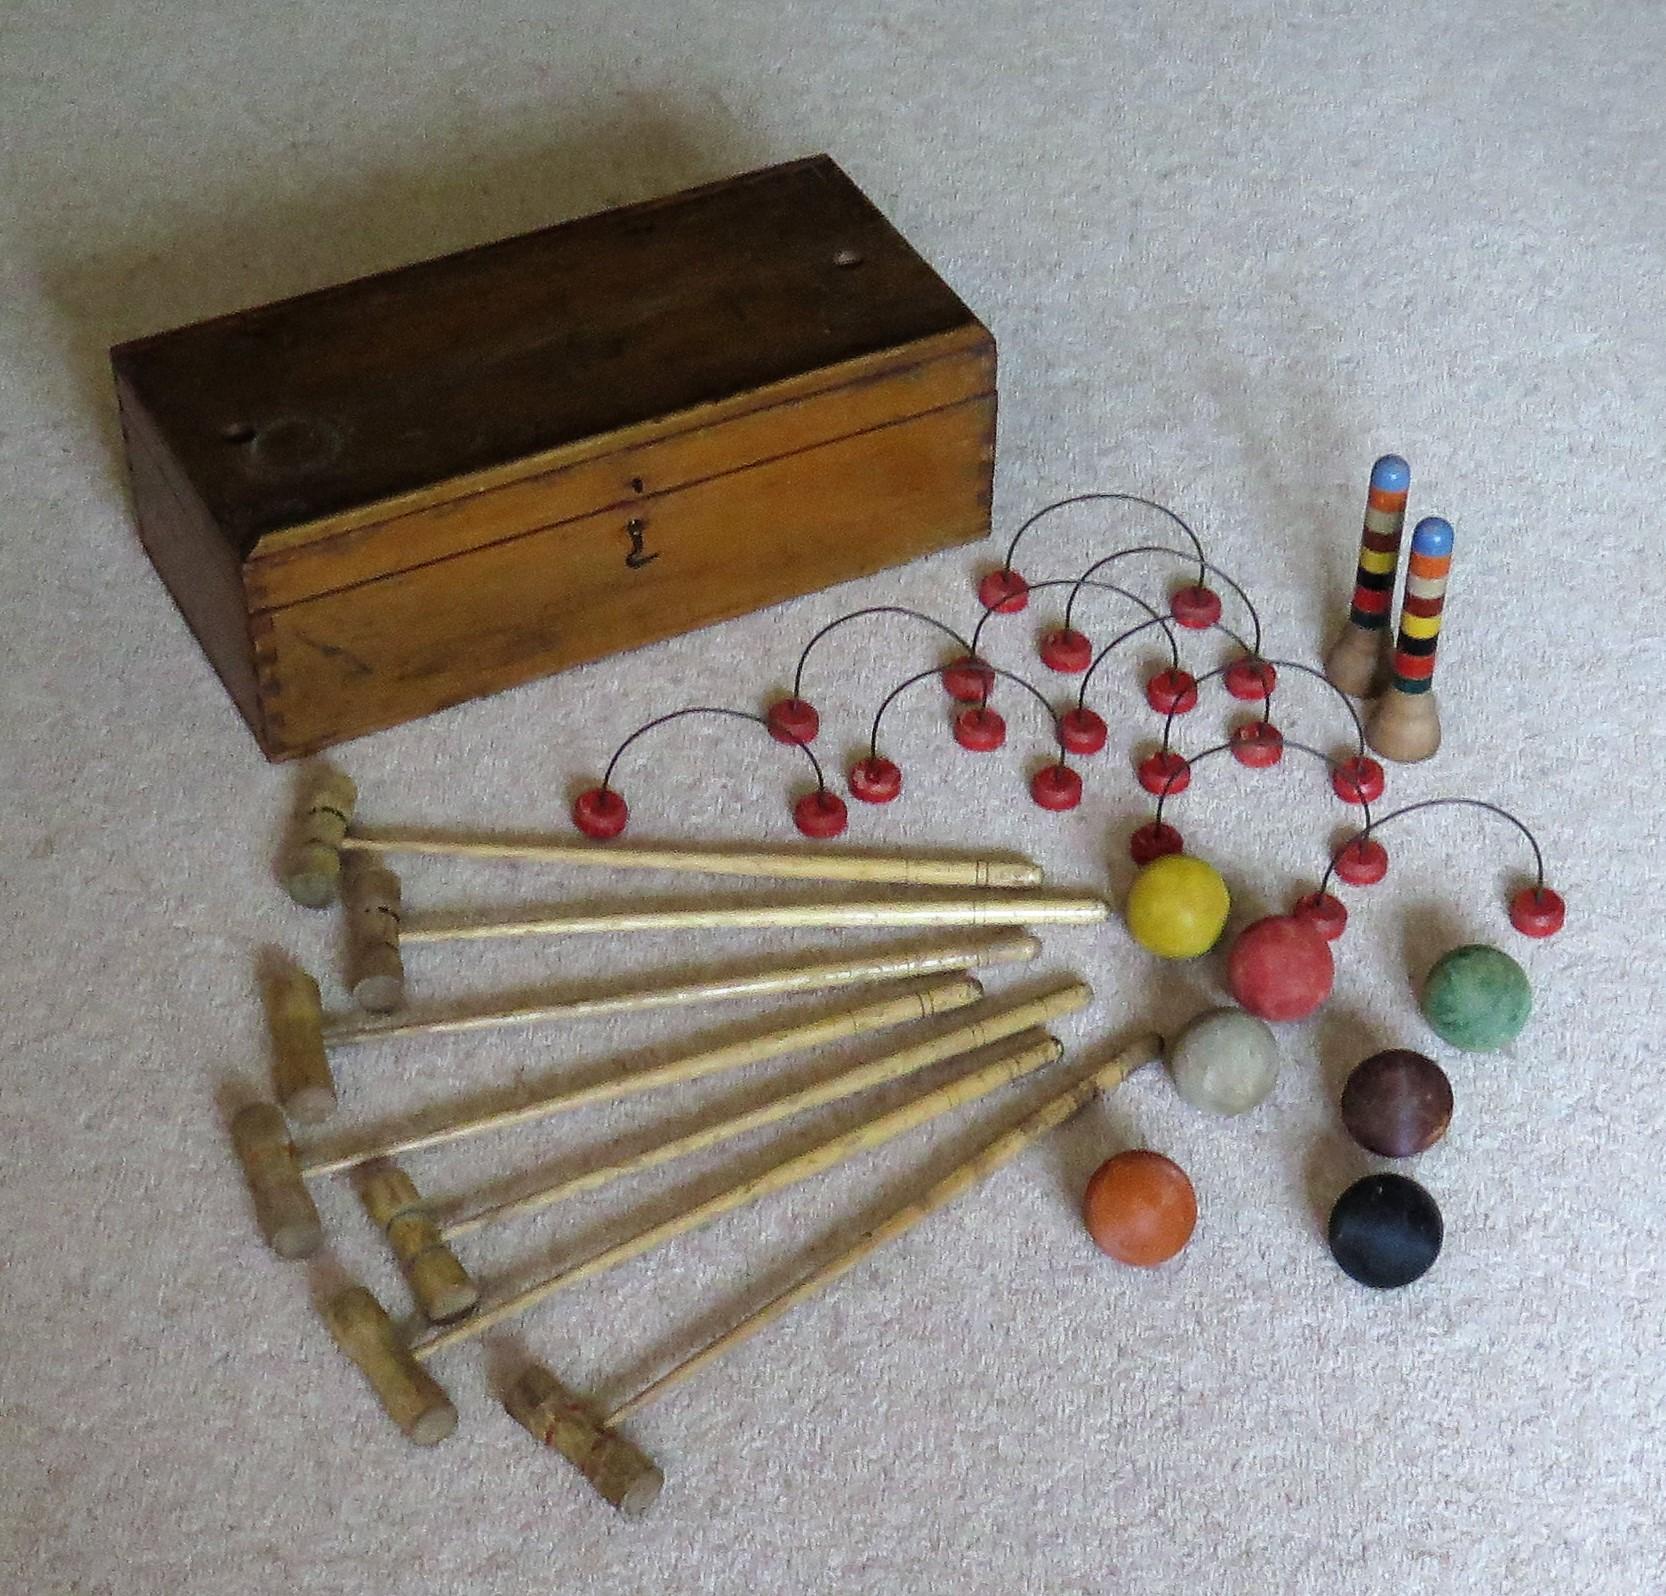 This is an original indoor or carpet croquet set game, coming with its own jointed wooden storage box, all dating to the early 20th century, circa 1930.

This is a classic game of strategy and skill, fun to play for all age groups.

The set has